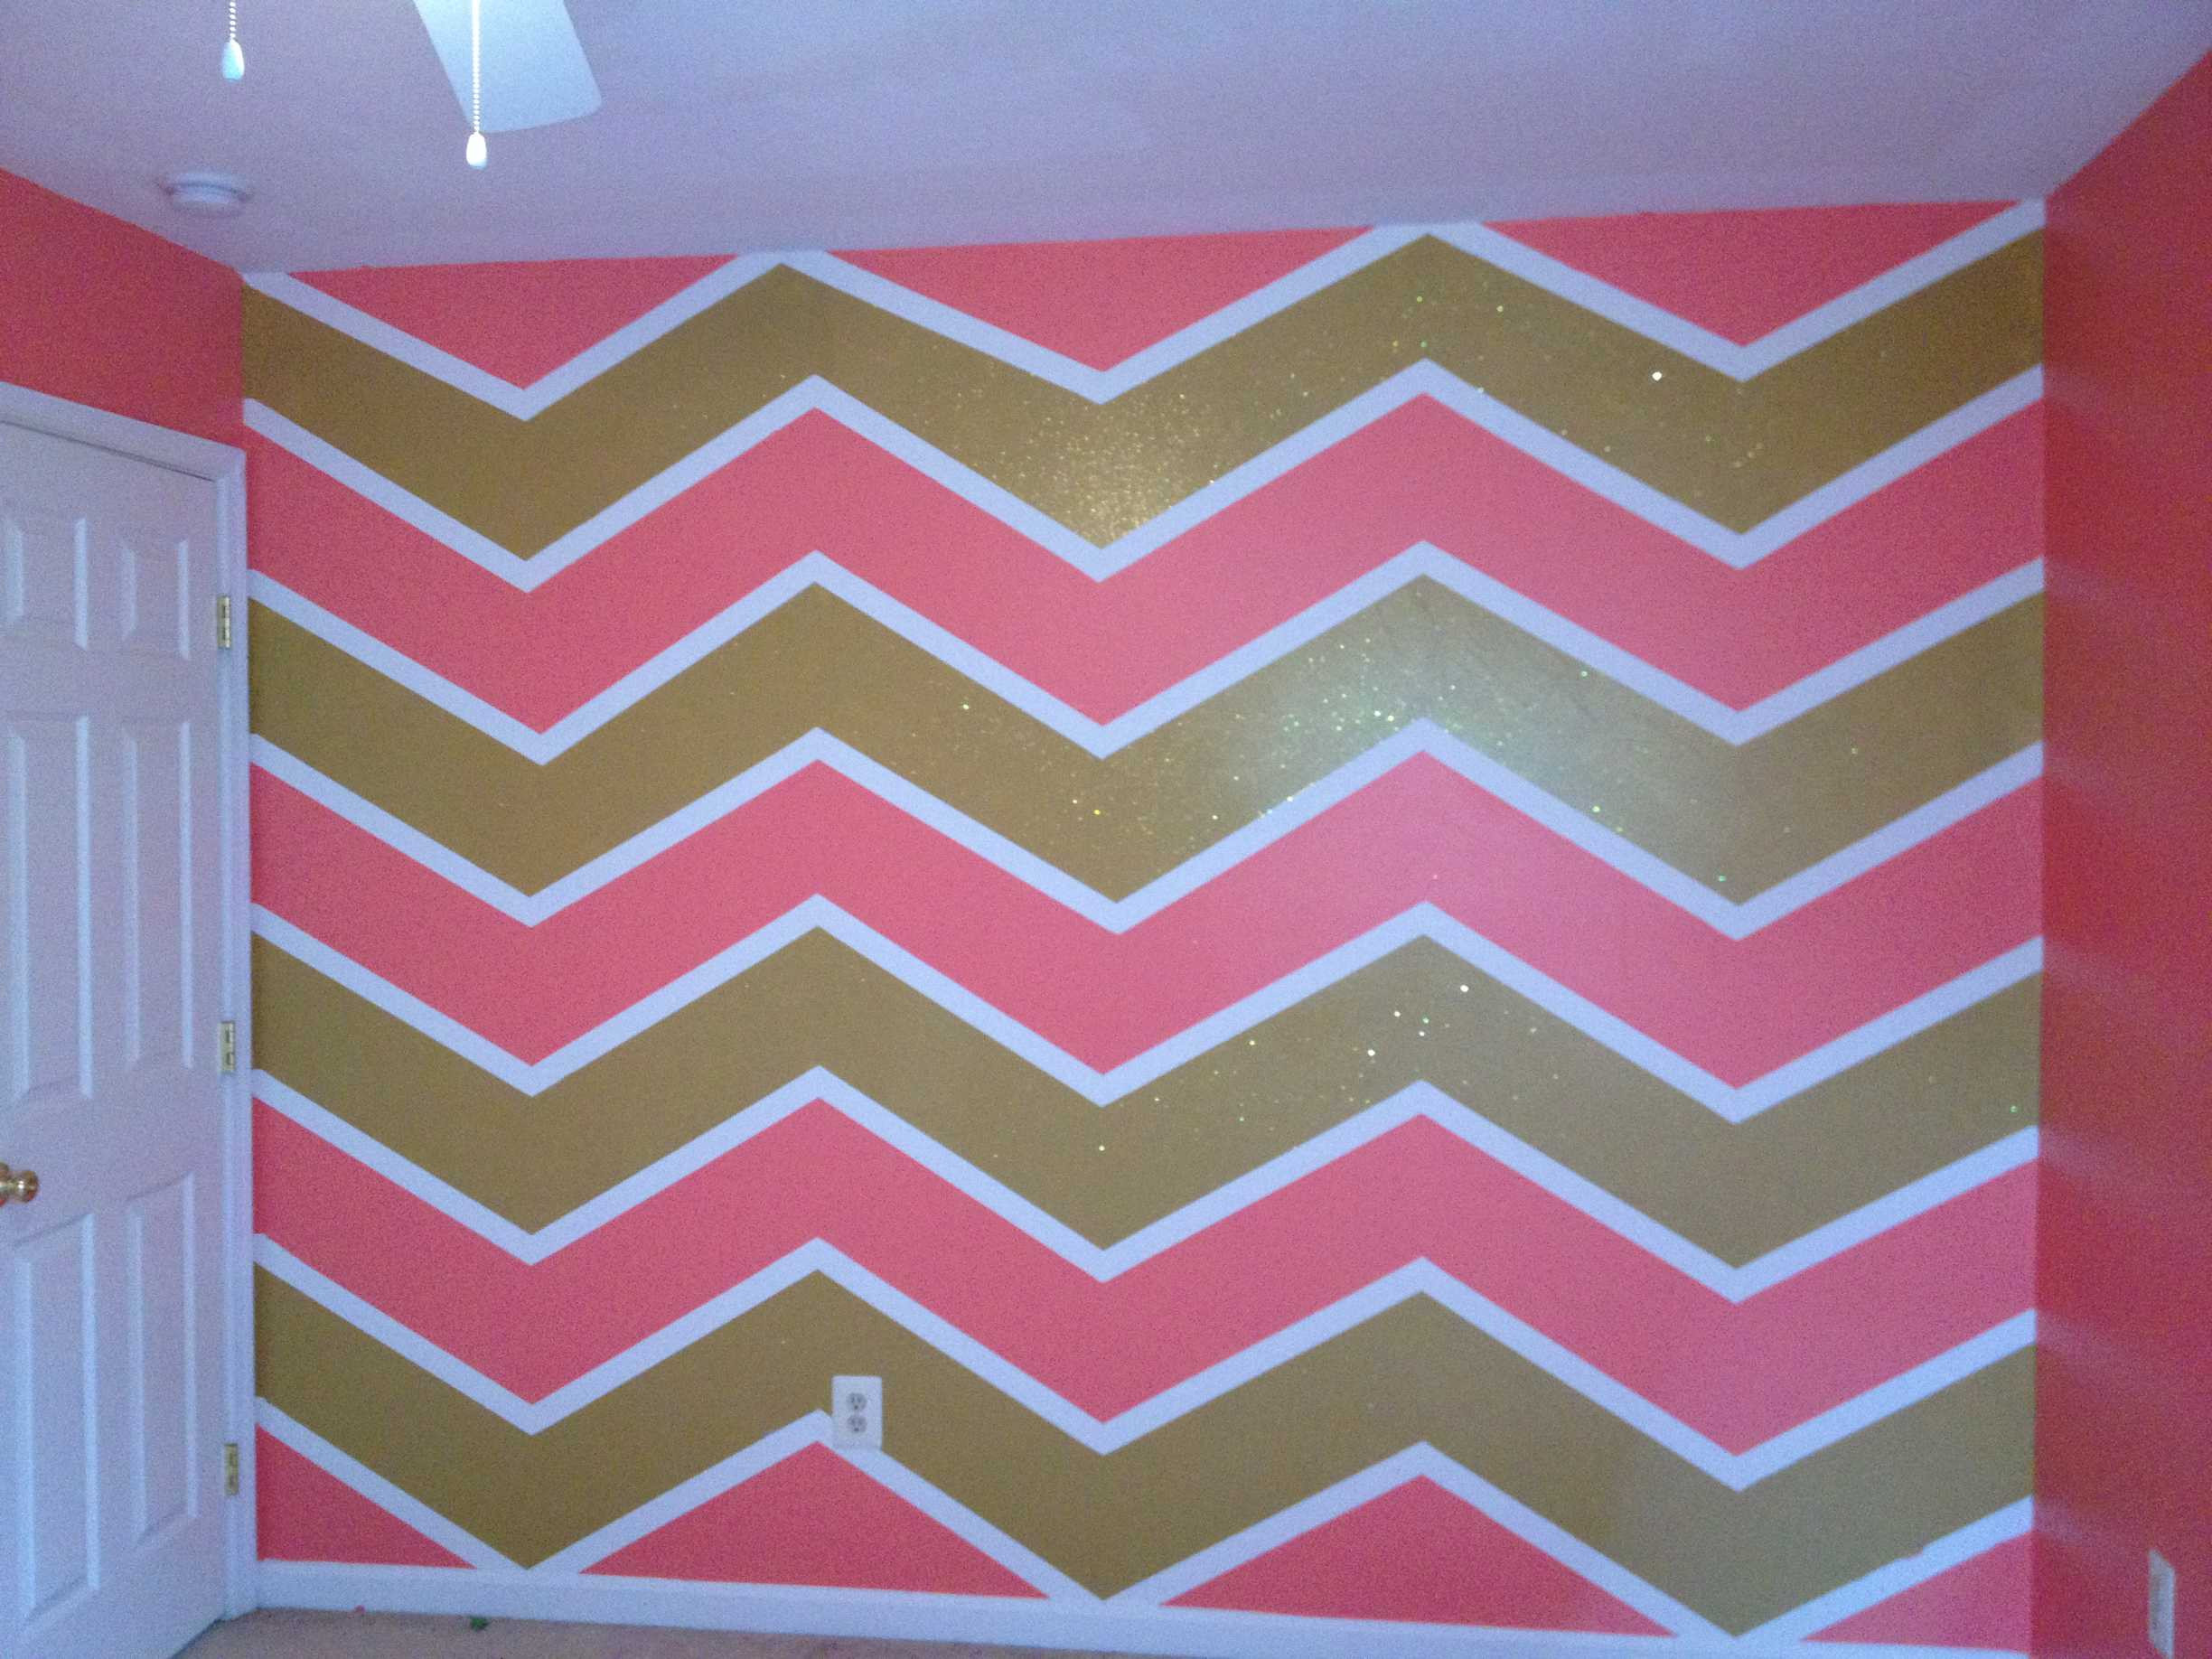 2448x1836 Pink, gold with glitter and white chevron painted wall